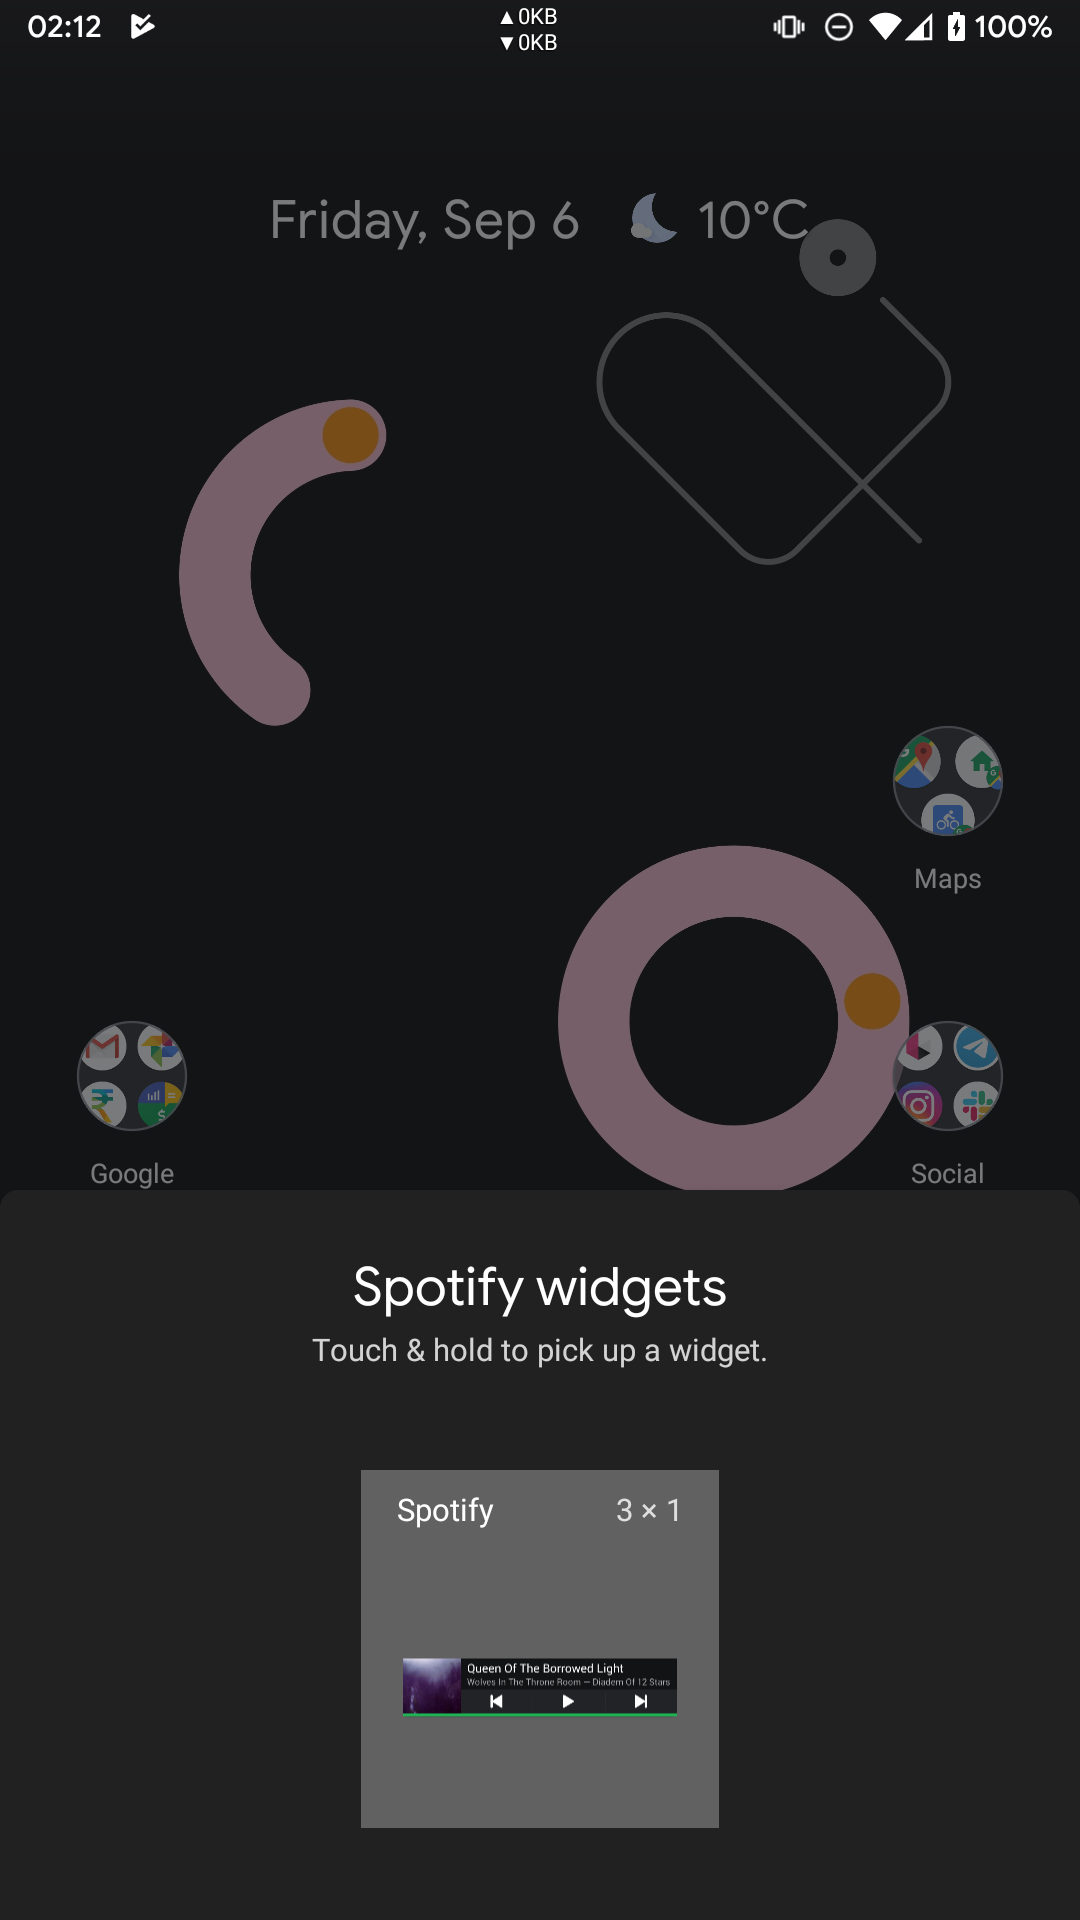 download the last version for android Spotify 1.2.13.661